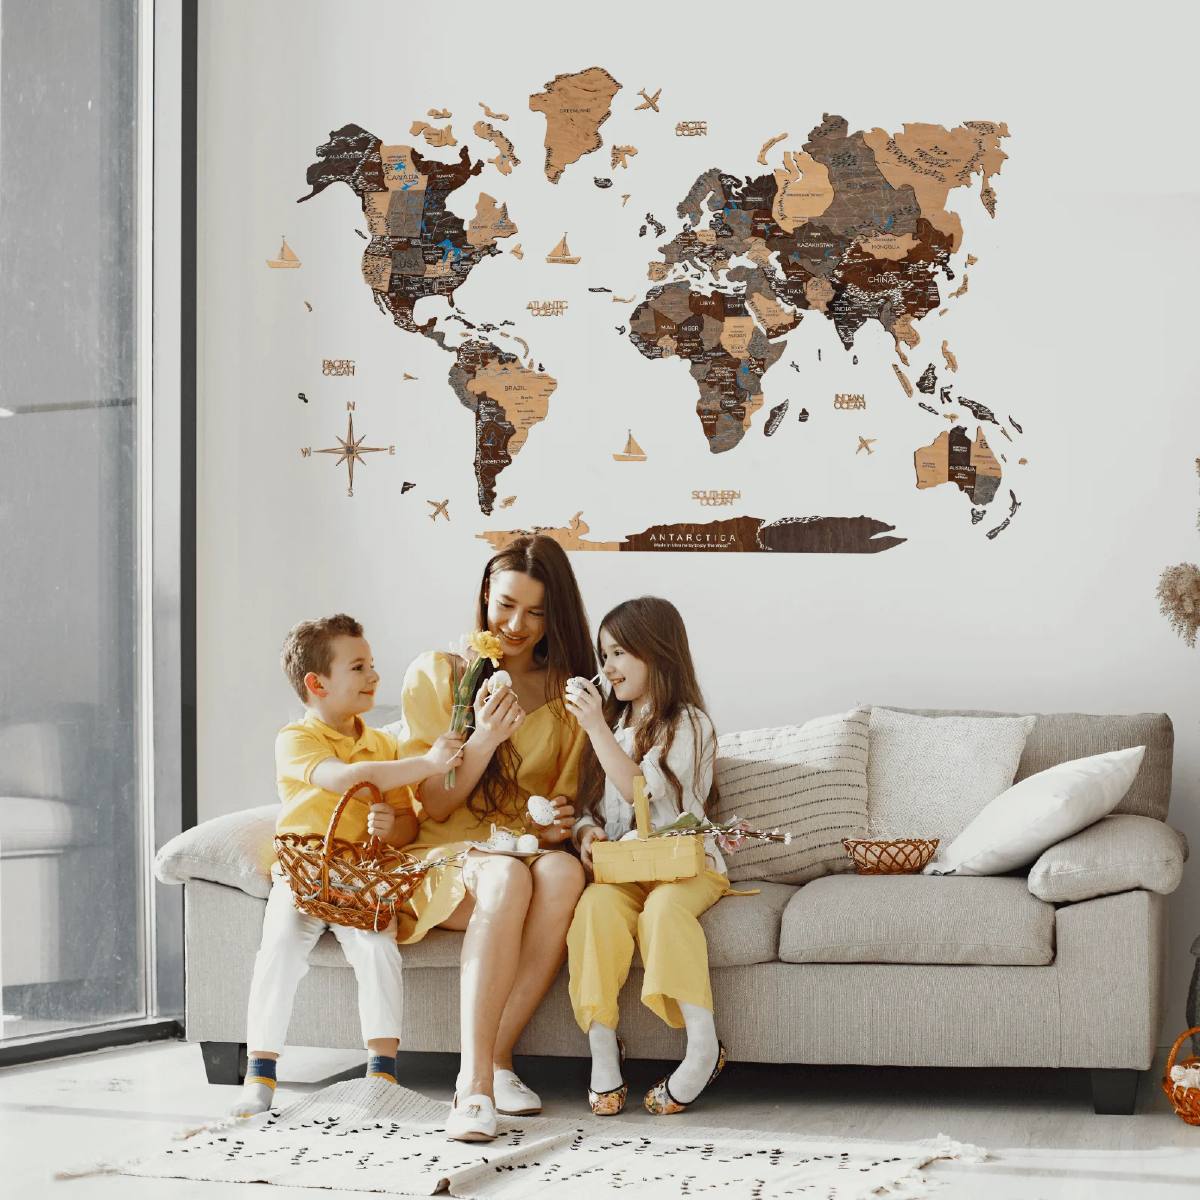 Large Size 3 Dimensions Wooden World Map 5 Types Modern Art Wall Decor  Painting Travel Map Home Office School Living Room